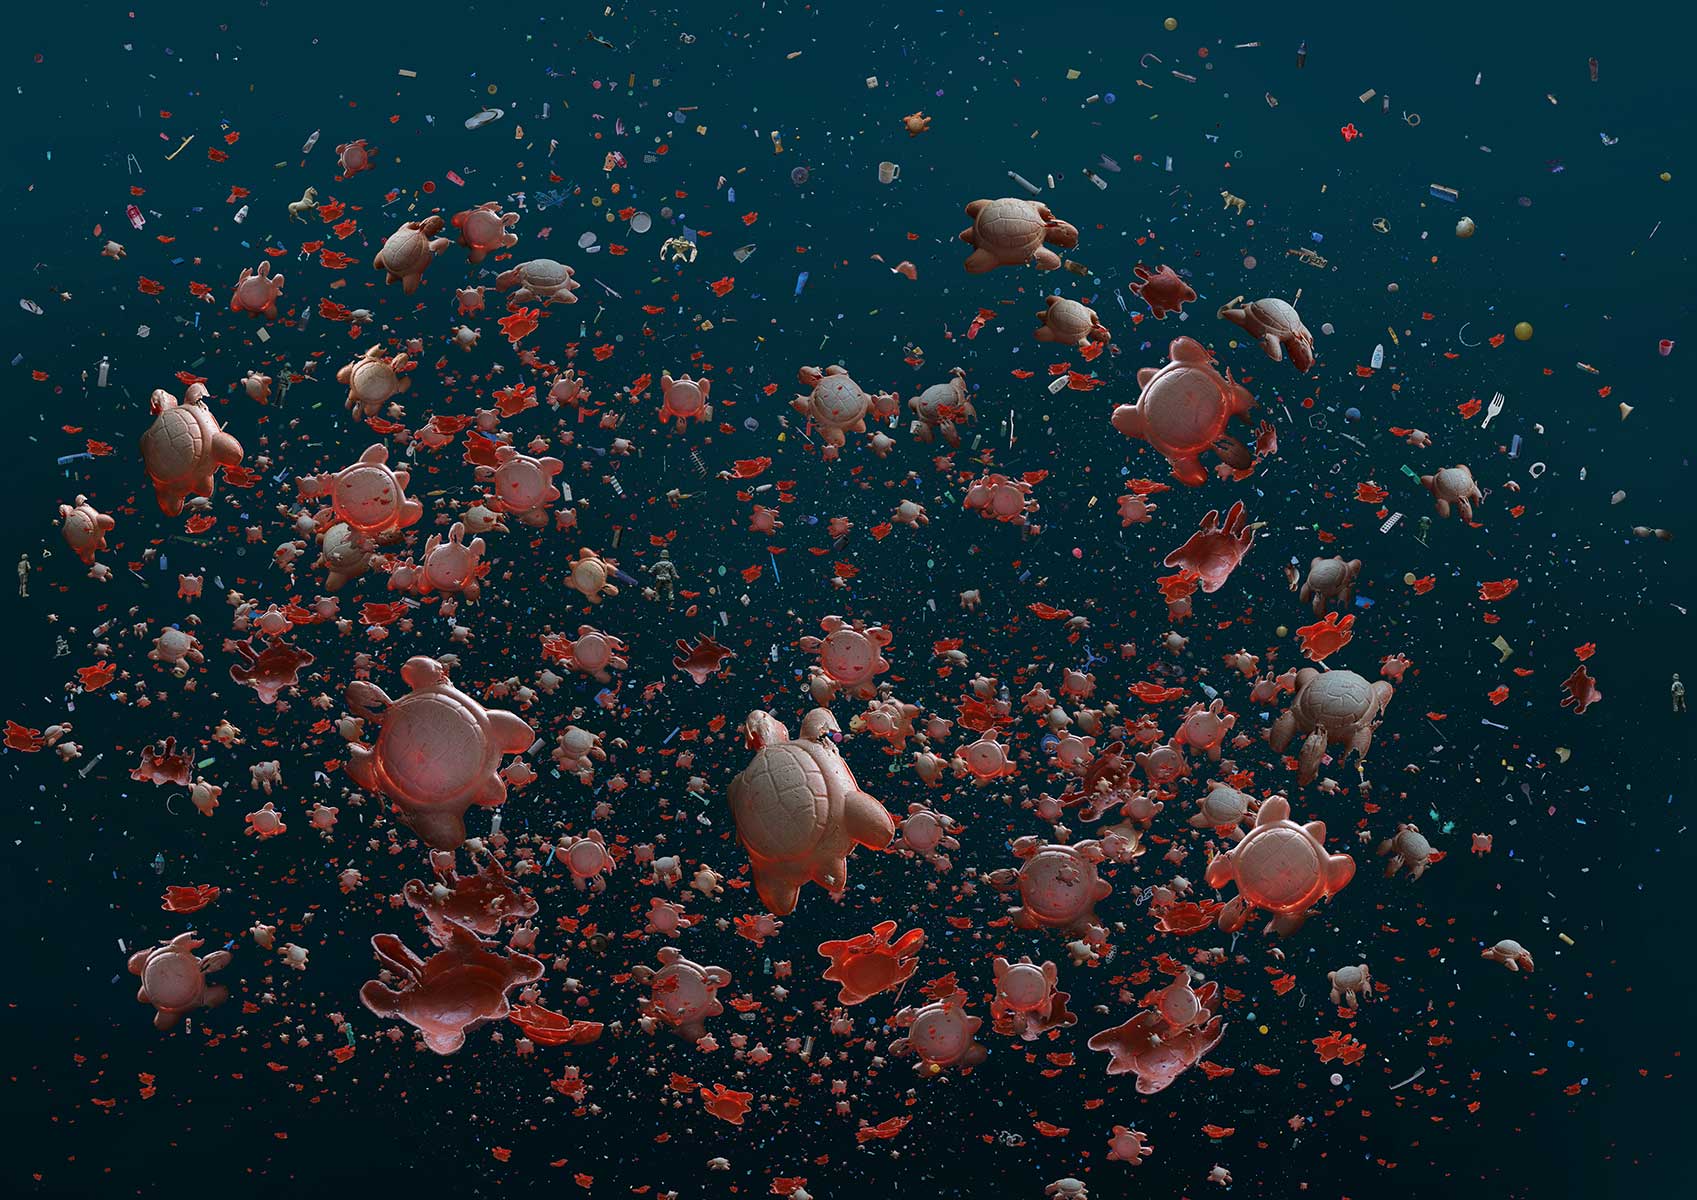 Ocean pollution pictures” by Mandy Barker, Shelf Life